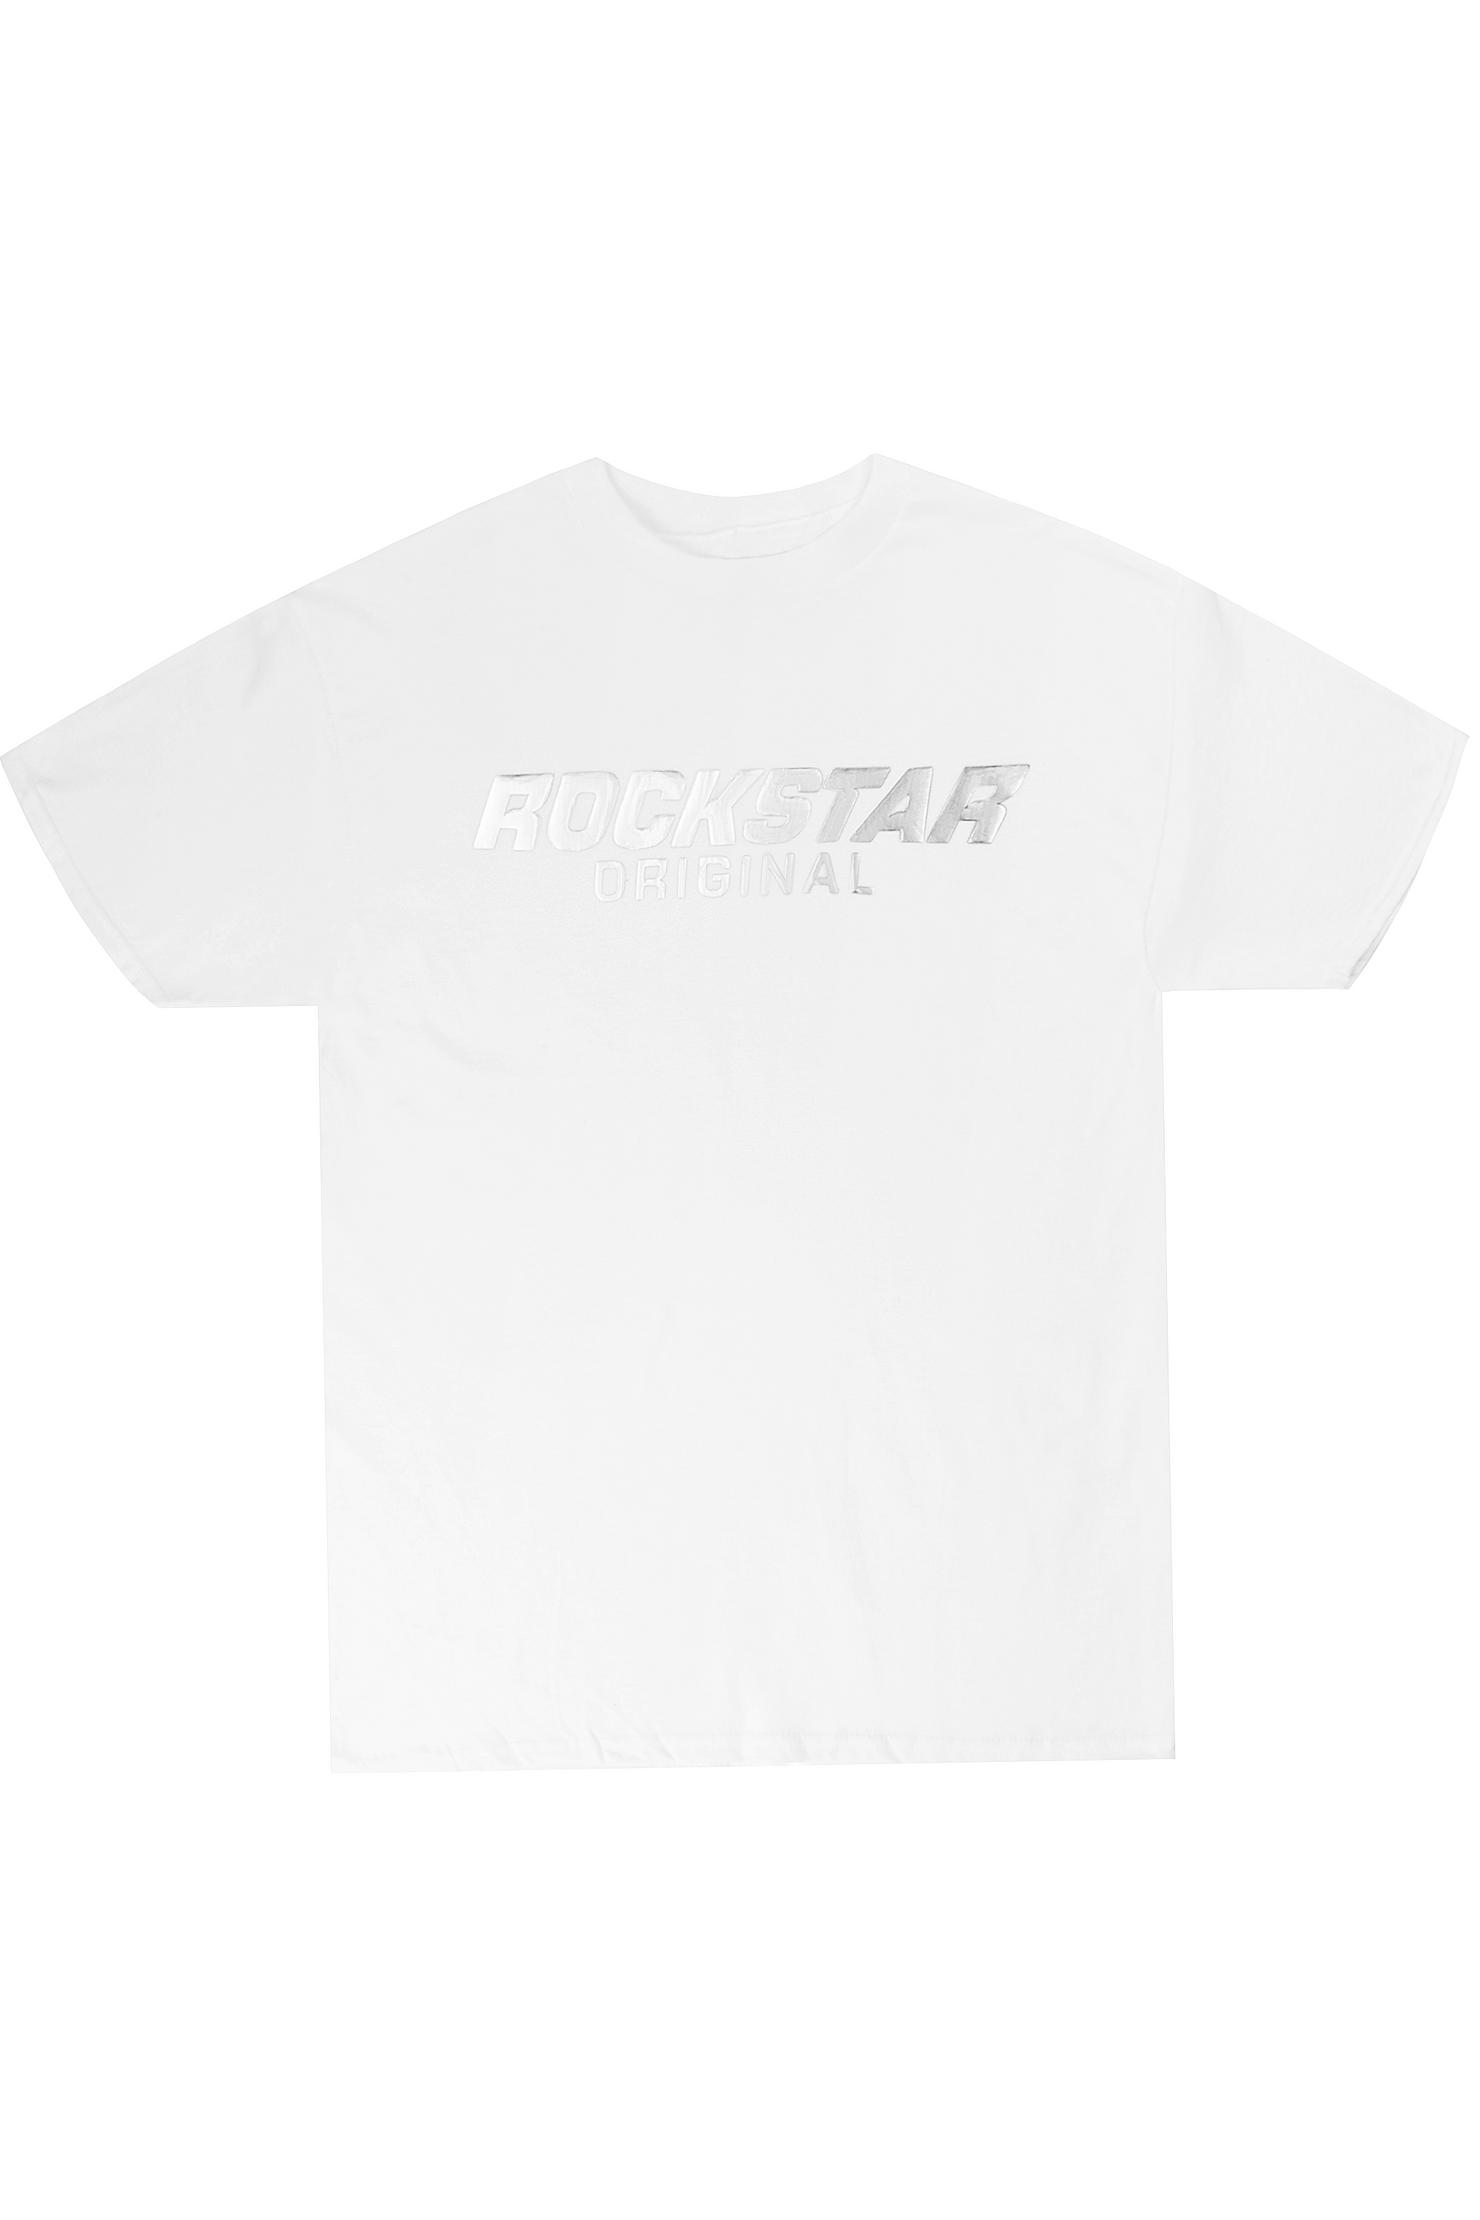 Mace Graphic T-Shirt -Silver